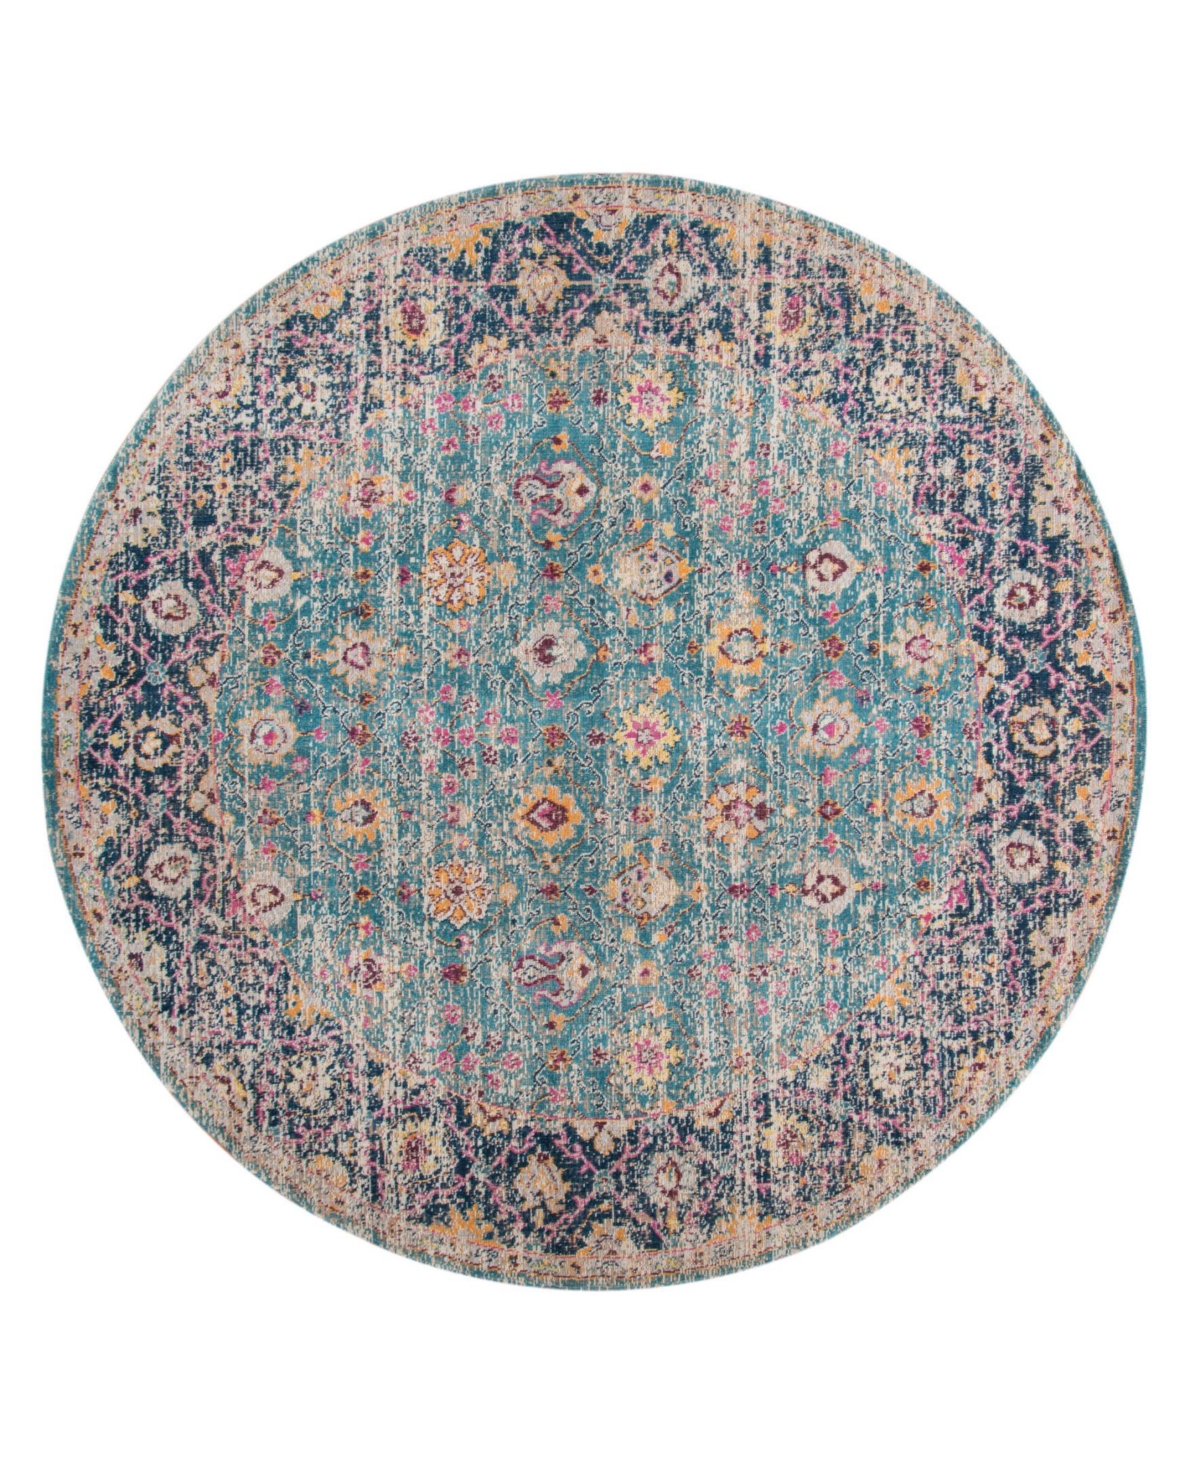 AMER RUGS ETERNAL ETE-28 TURQUOISE 6'7" ROUND RUG